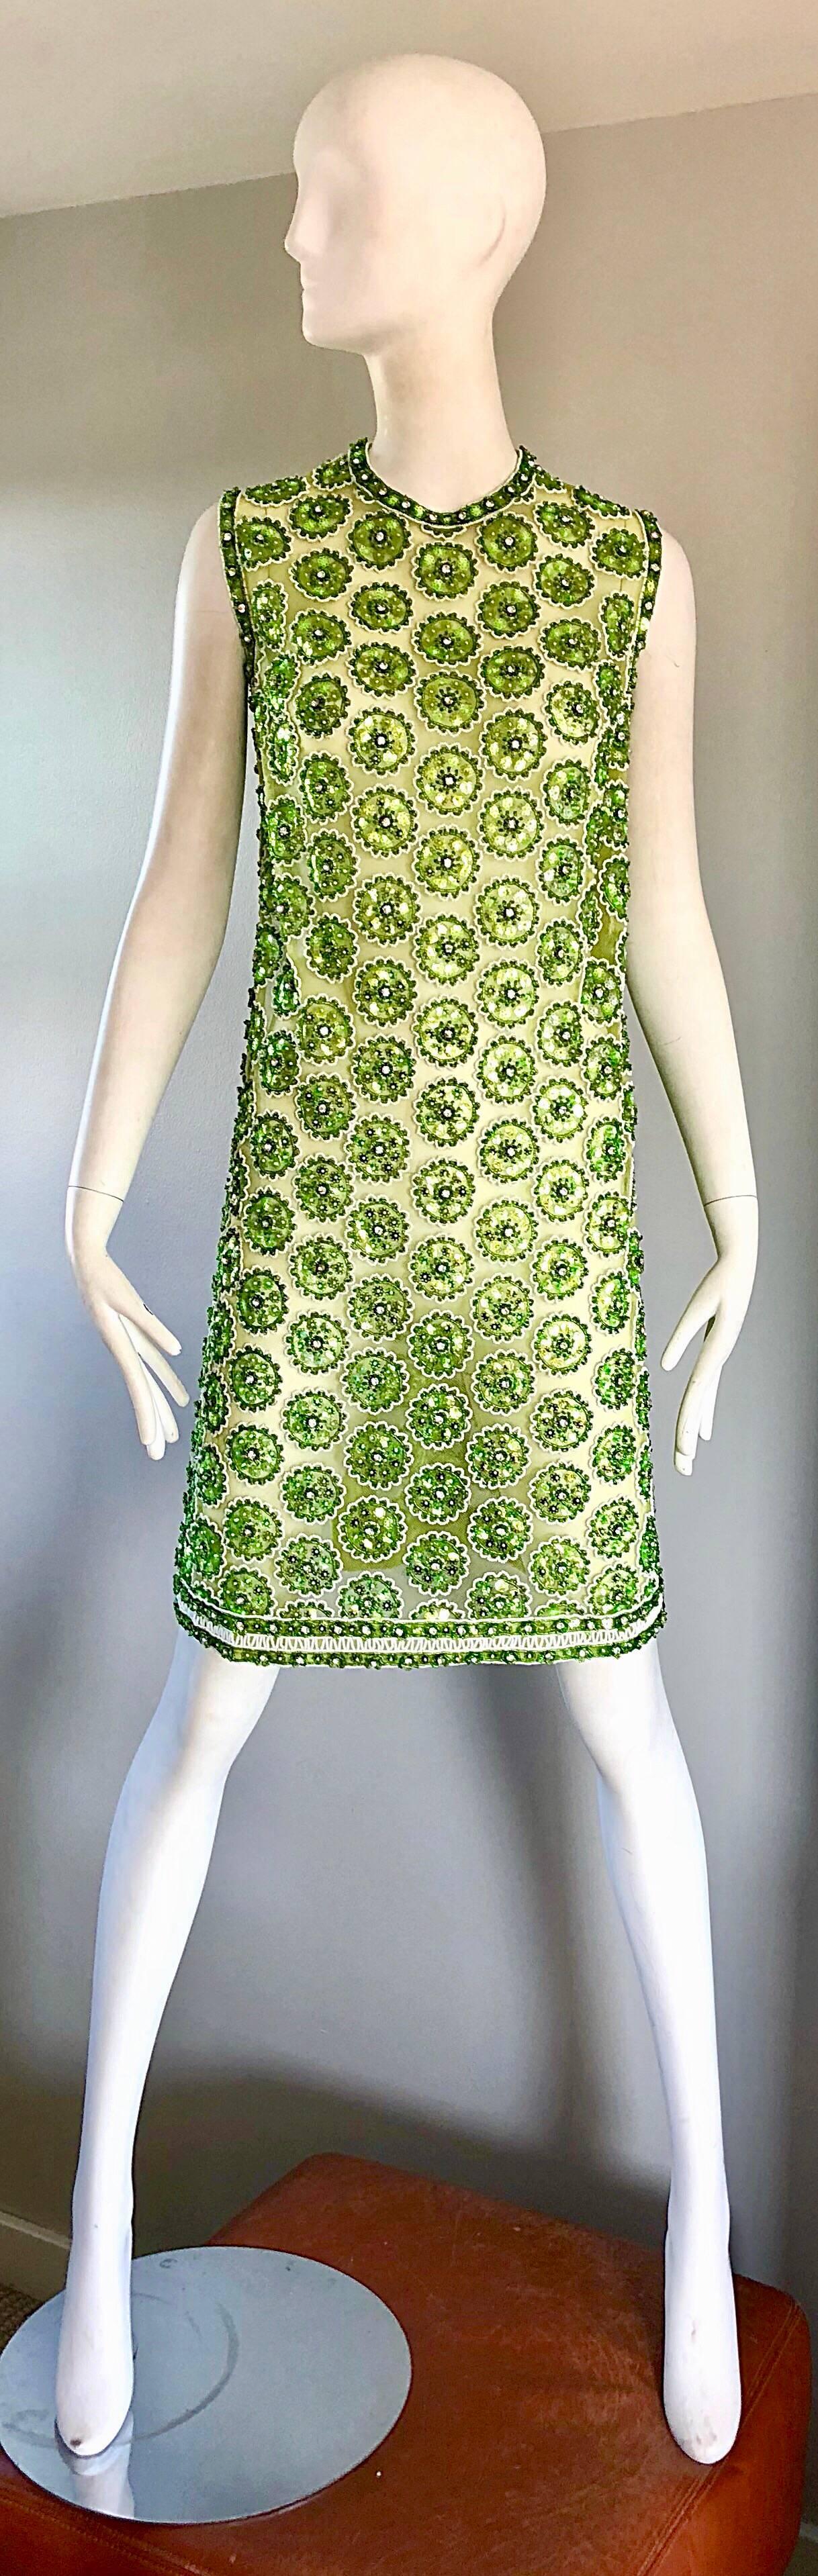 Chic 1960s fully sequined and beaded mesh demi couture tunic dress! Features thousands of hand-sewn sequins, rhinestones, and beads throughout to form flower shapes. Full metal zipper up the back with hook-and-eye closure. Semi sheer net mesh. High